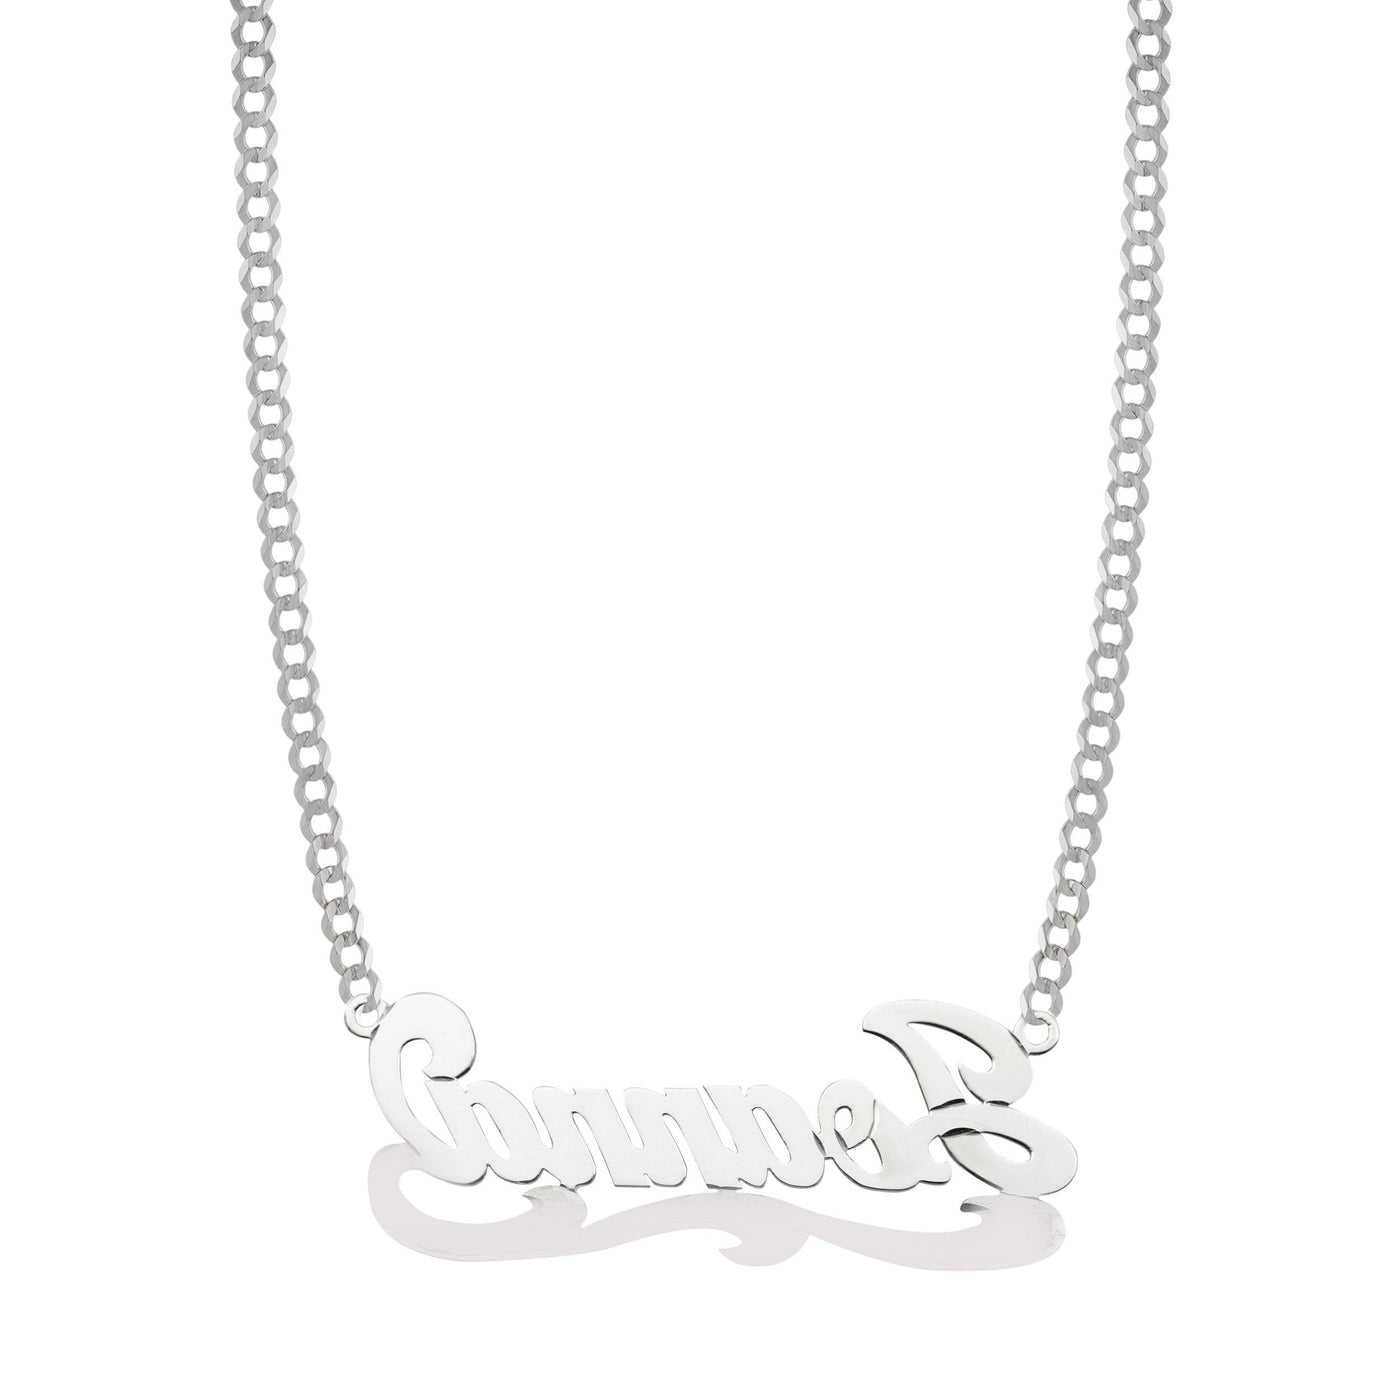 Ladies Script Name Plate Necklace 14K White Gold - Style 57 - bayamjewelry